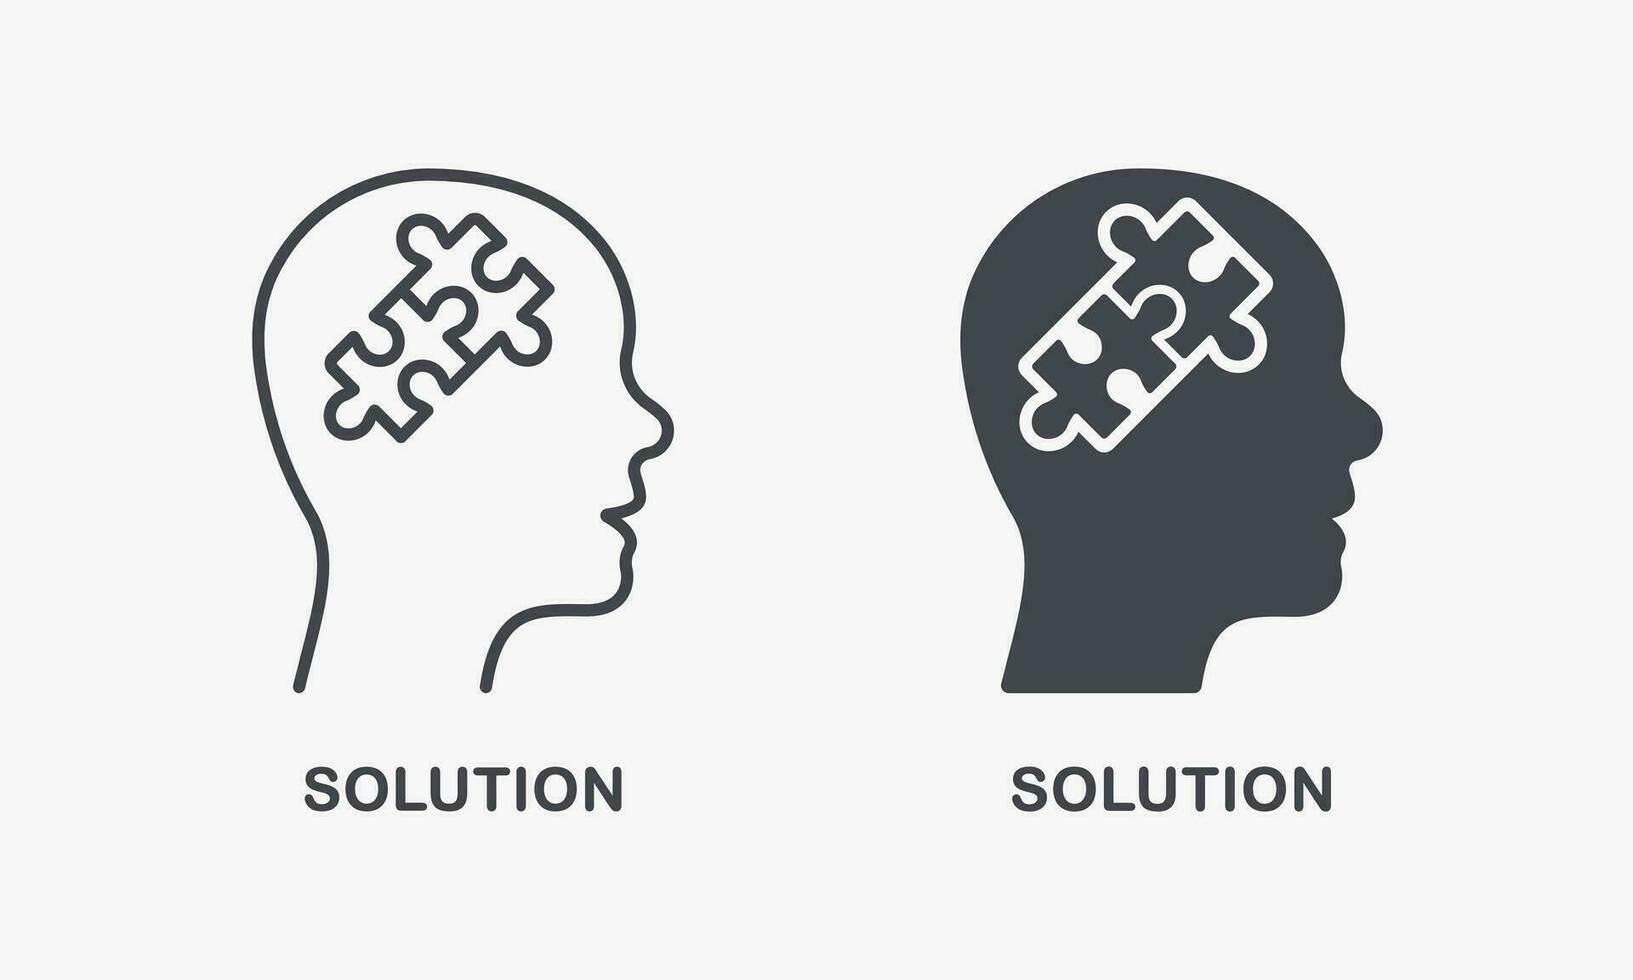 Creative Idea, Person Brain and Jigsaw Pieces Silhouette and Line Icon Set. Puzzle in Human Head Solution Pictogram. Brainstorm Intellectual Process Symbol Collection. Isolated Vector Illustration.